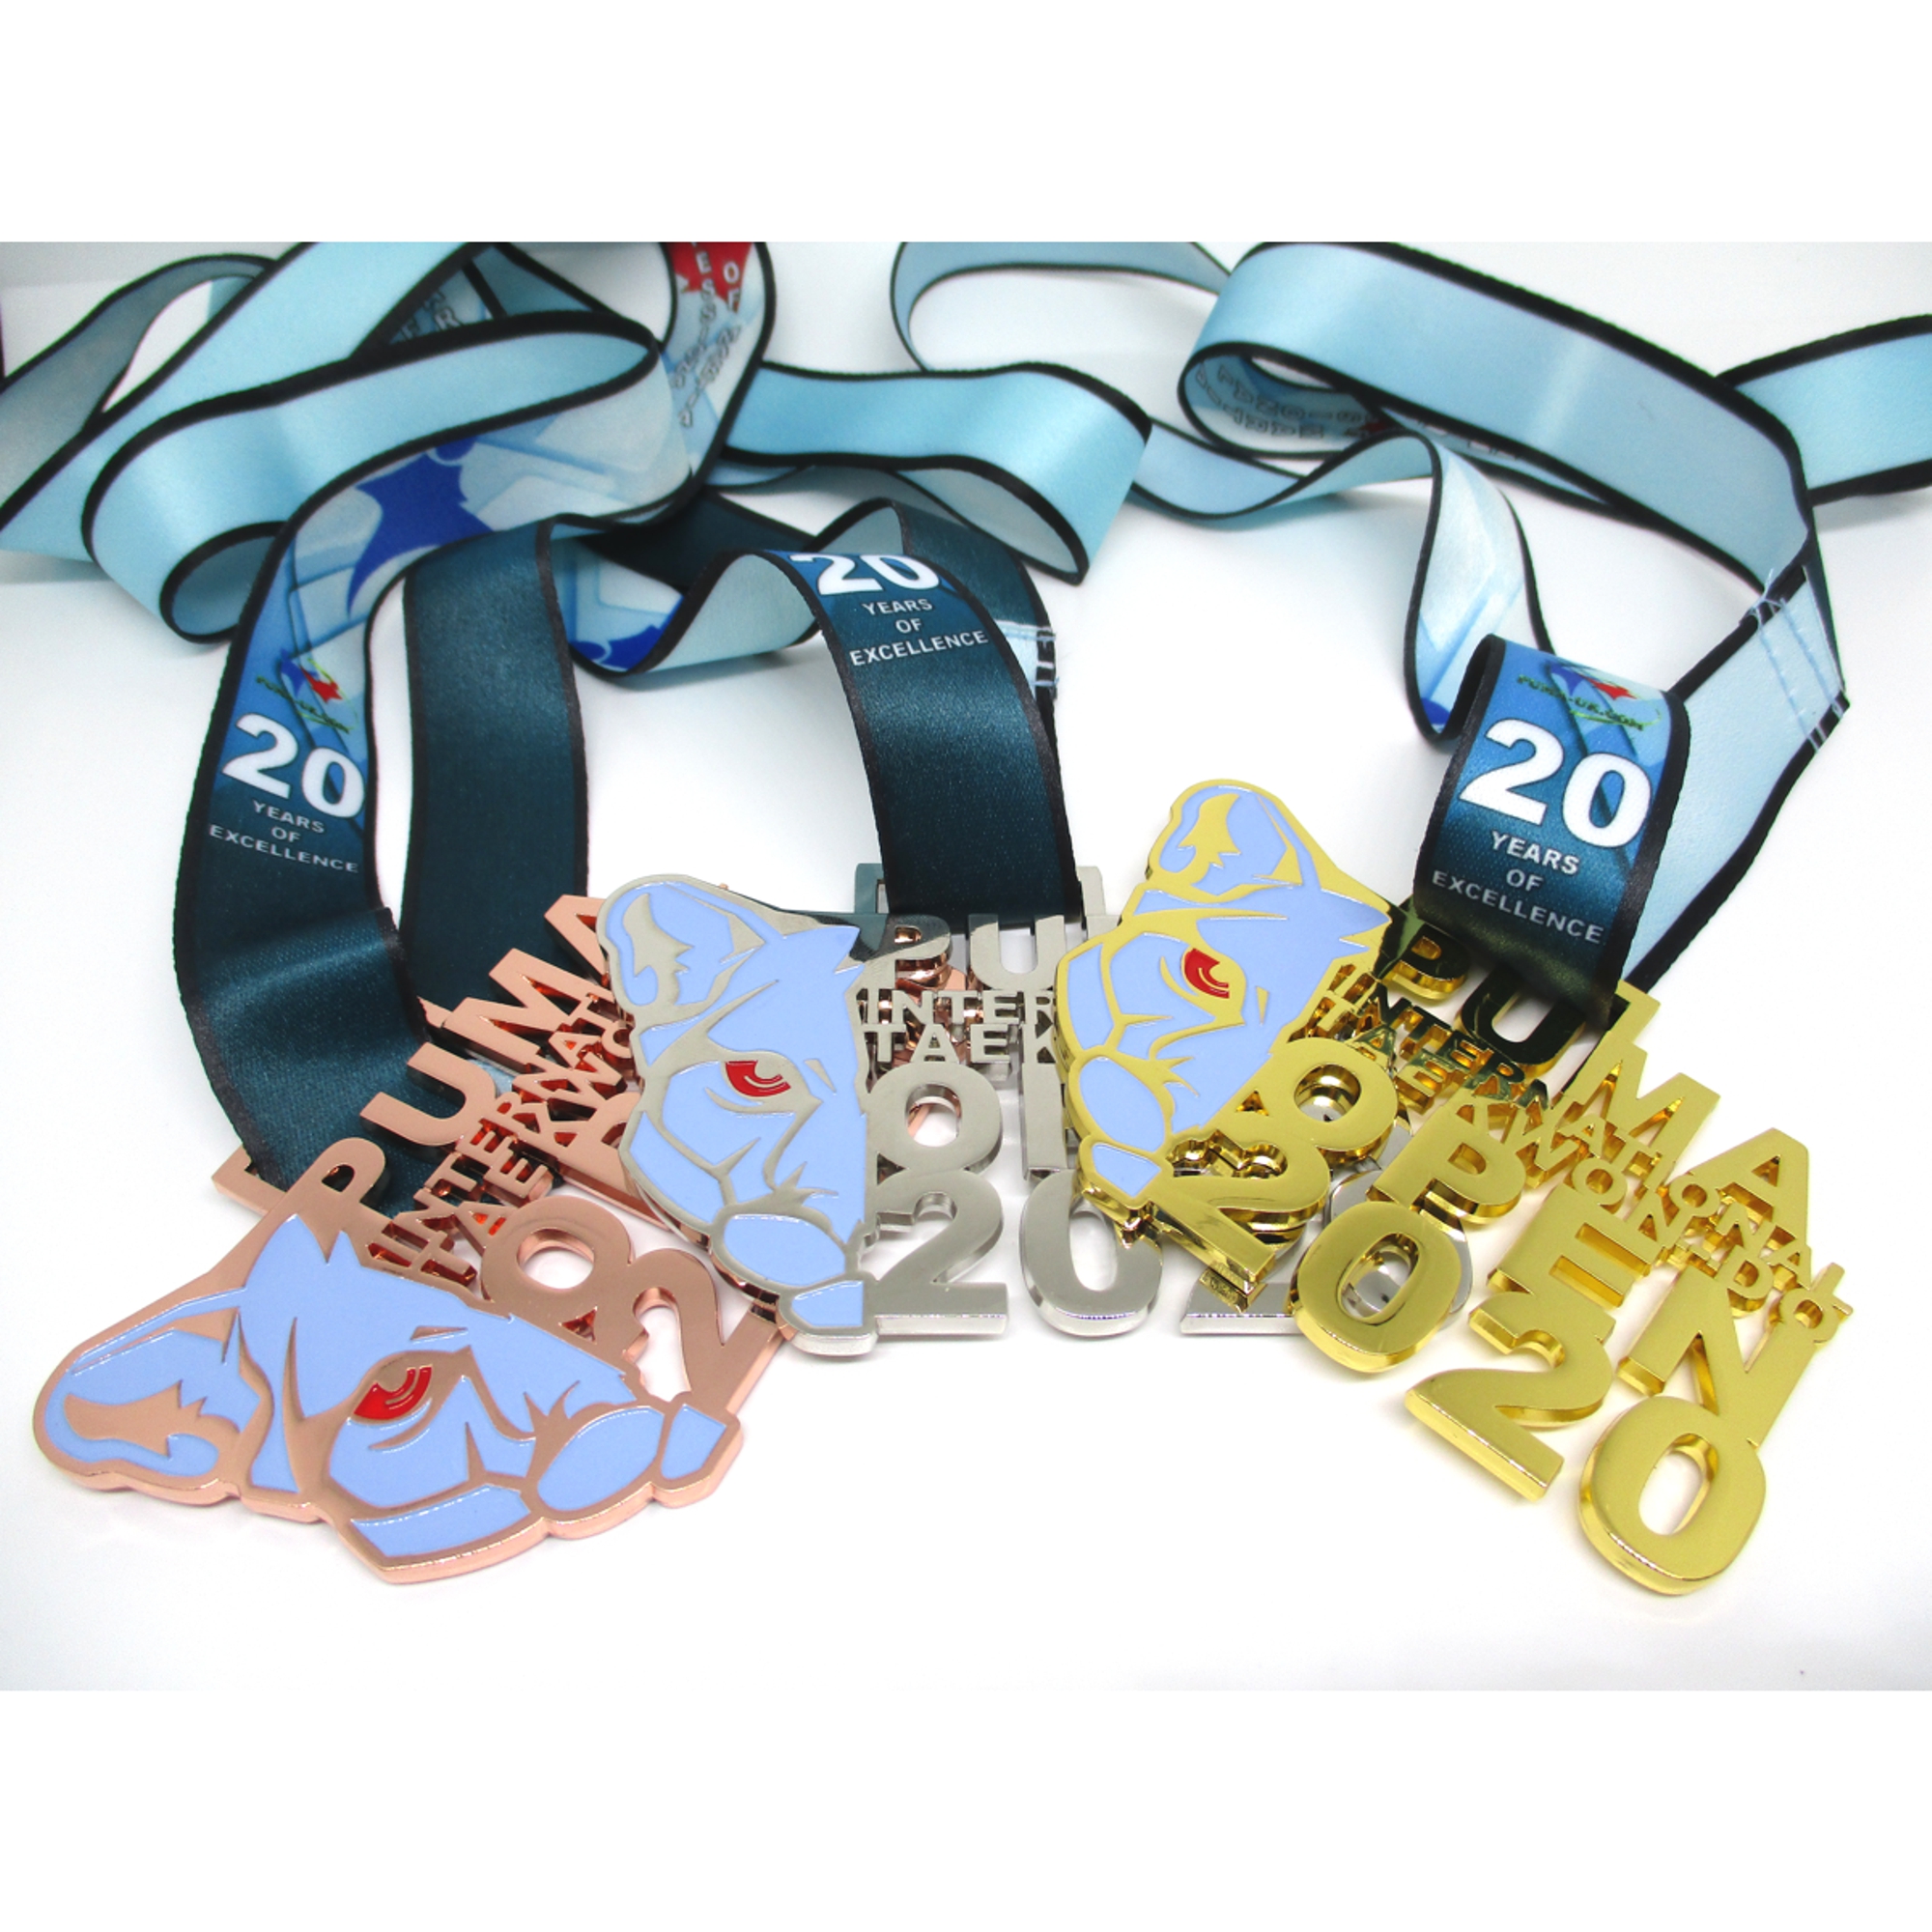 COMPETITION MEDALS